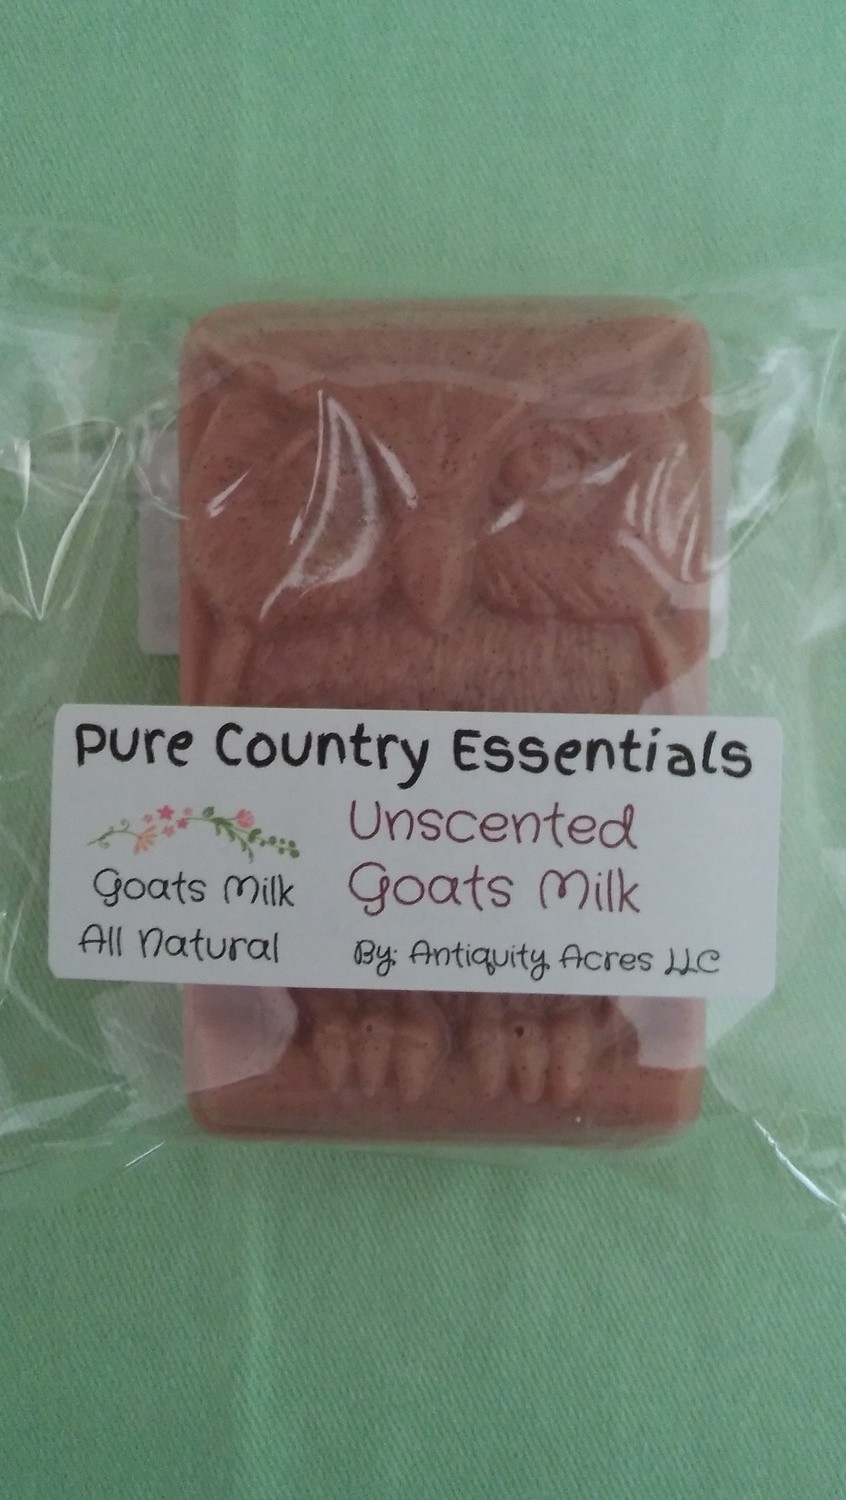 Pure Country Essentials Soap, Goats Milk, Unscented, Owl Design`